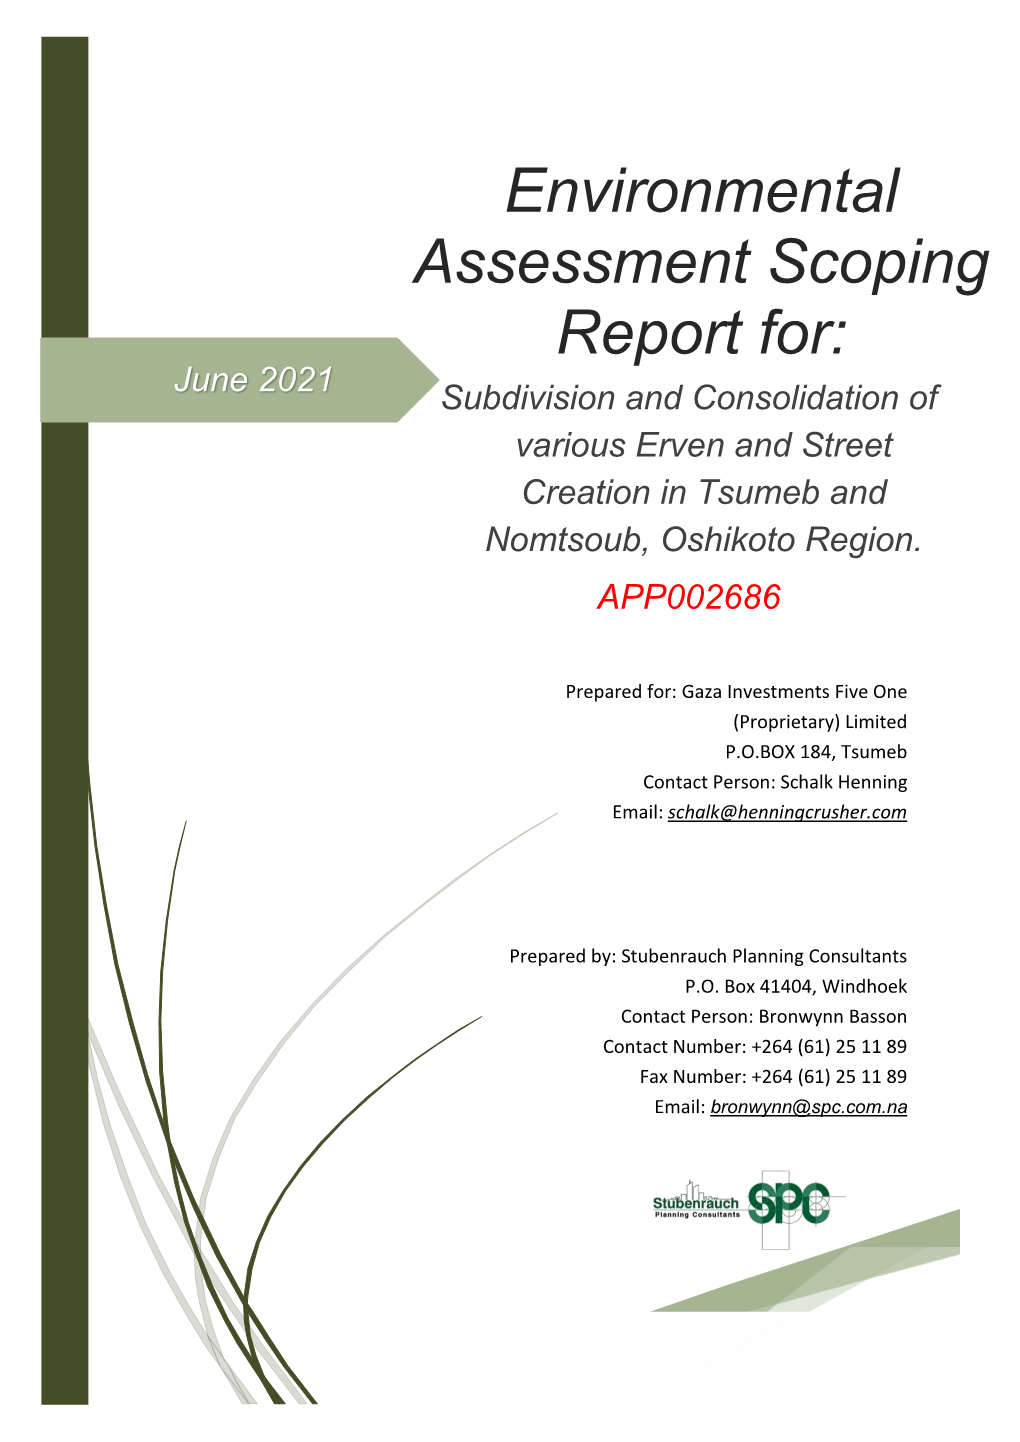 Environmental Assessment Scoping Report For: June 2021 Subdivision and Consolidation of Various Erven and Street Creation in Tsumeb and Nomtsoub, Oshikoto Region